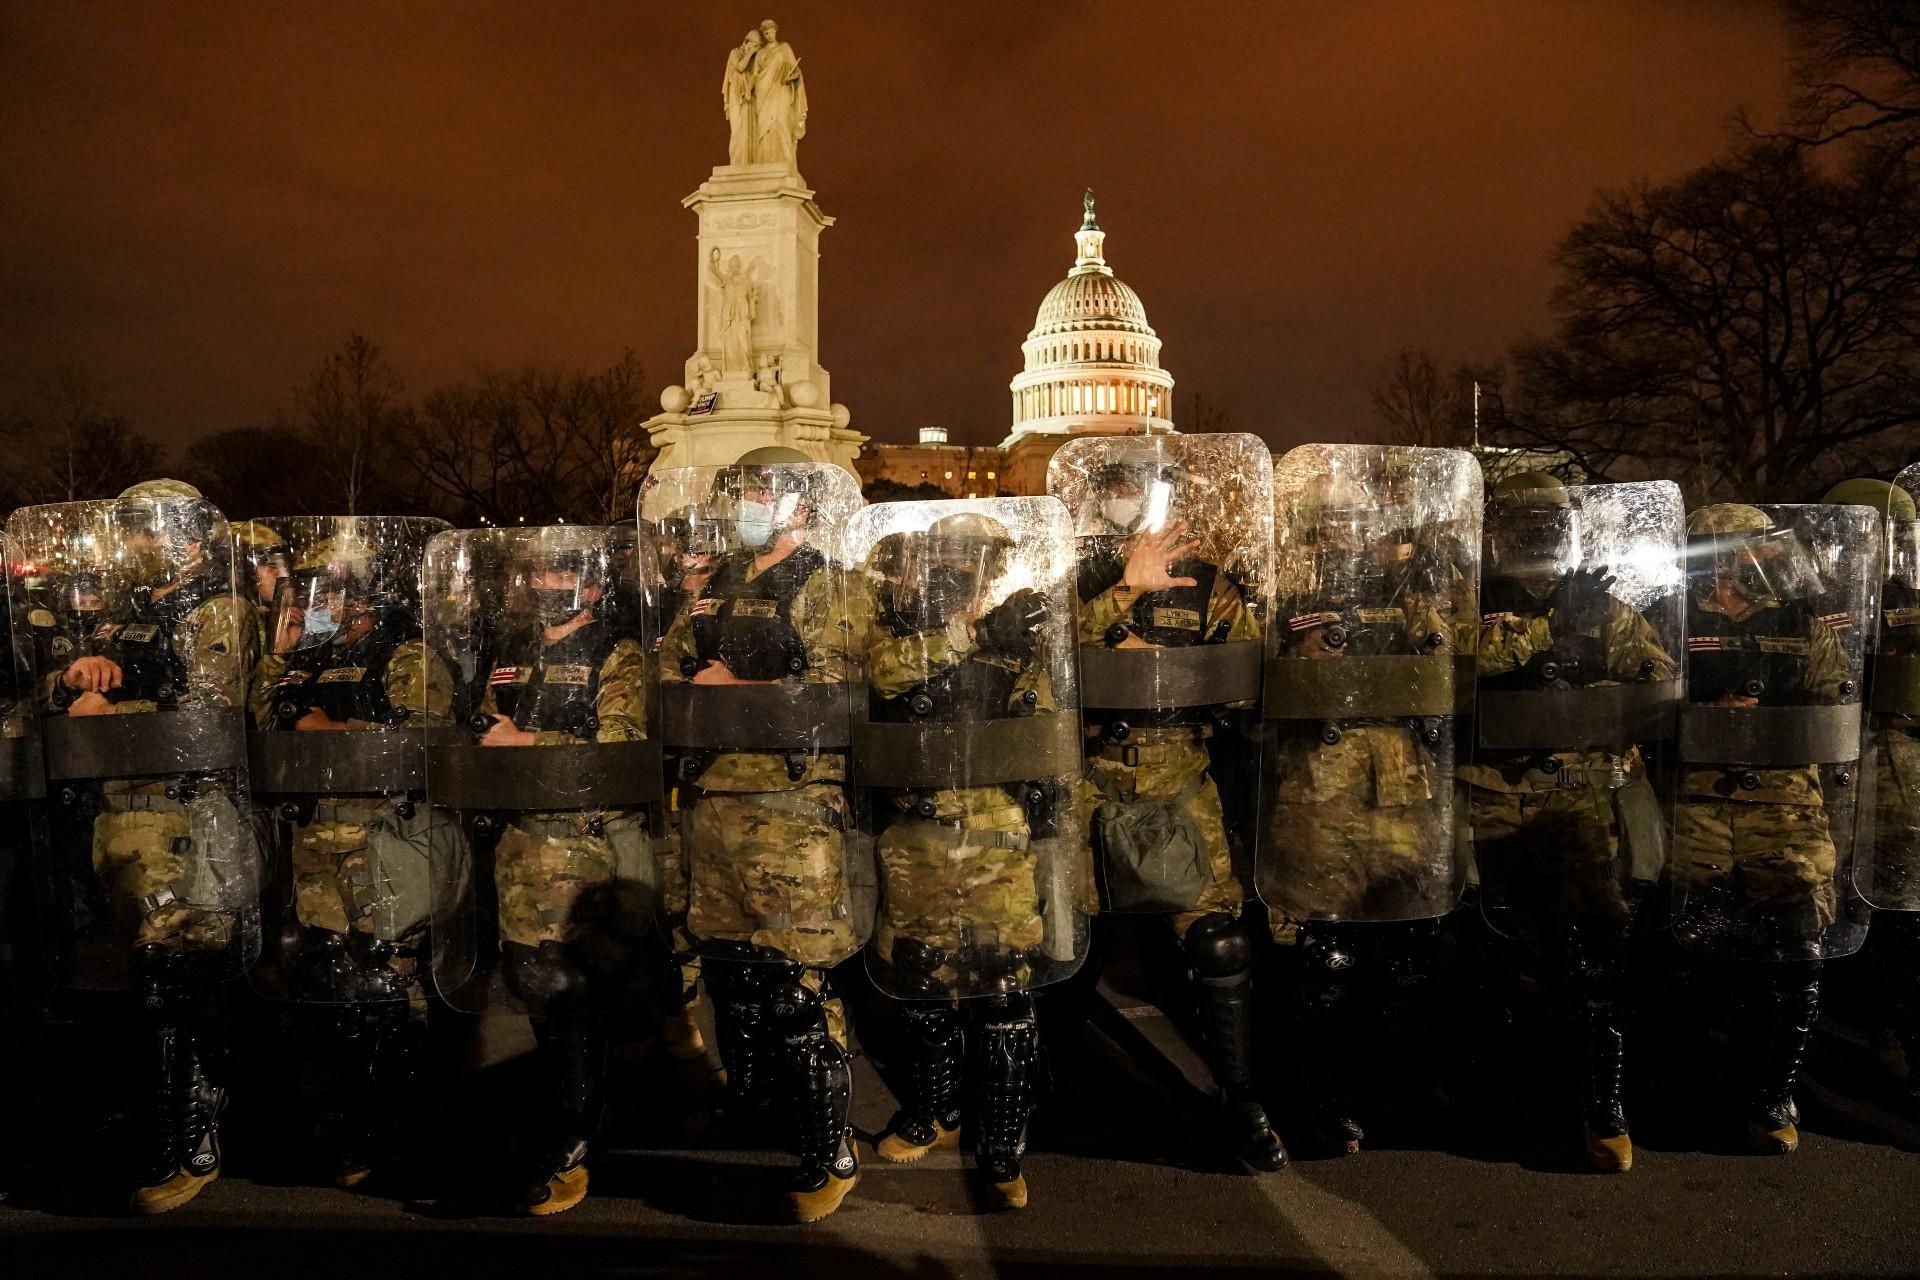 District of Columbia National Guard stand outside the Capitol, Wednesday night, Jan. 6, 2021, after a day of rioting protesters. (AP Photo / John Minchillo)